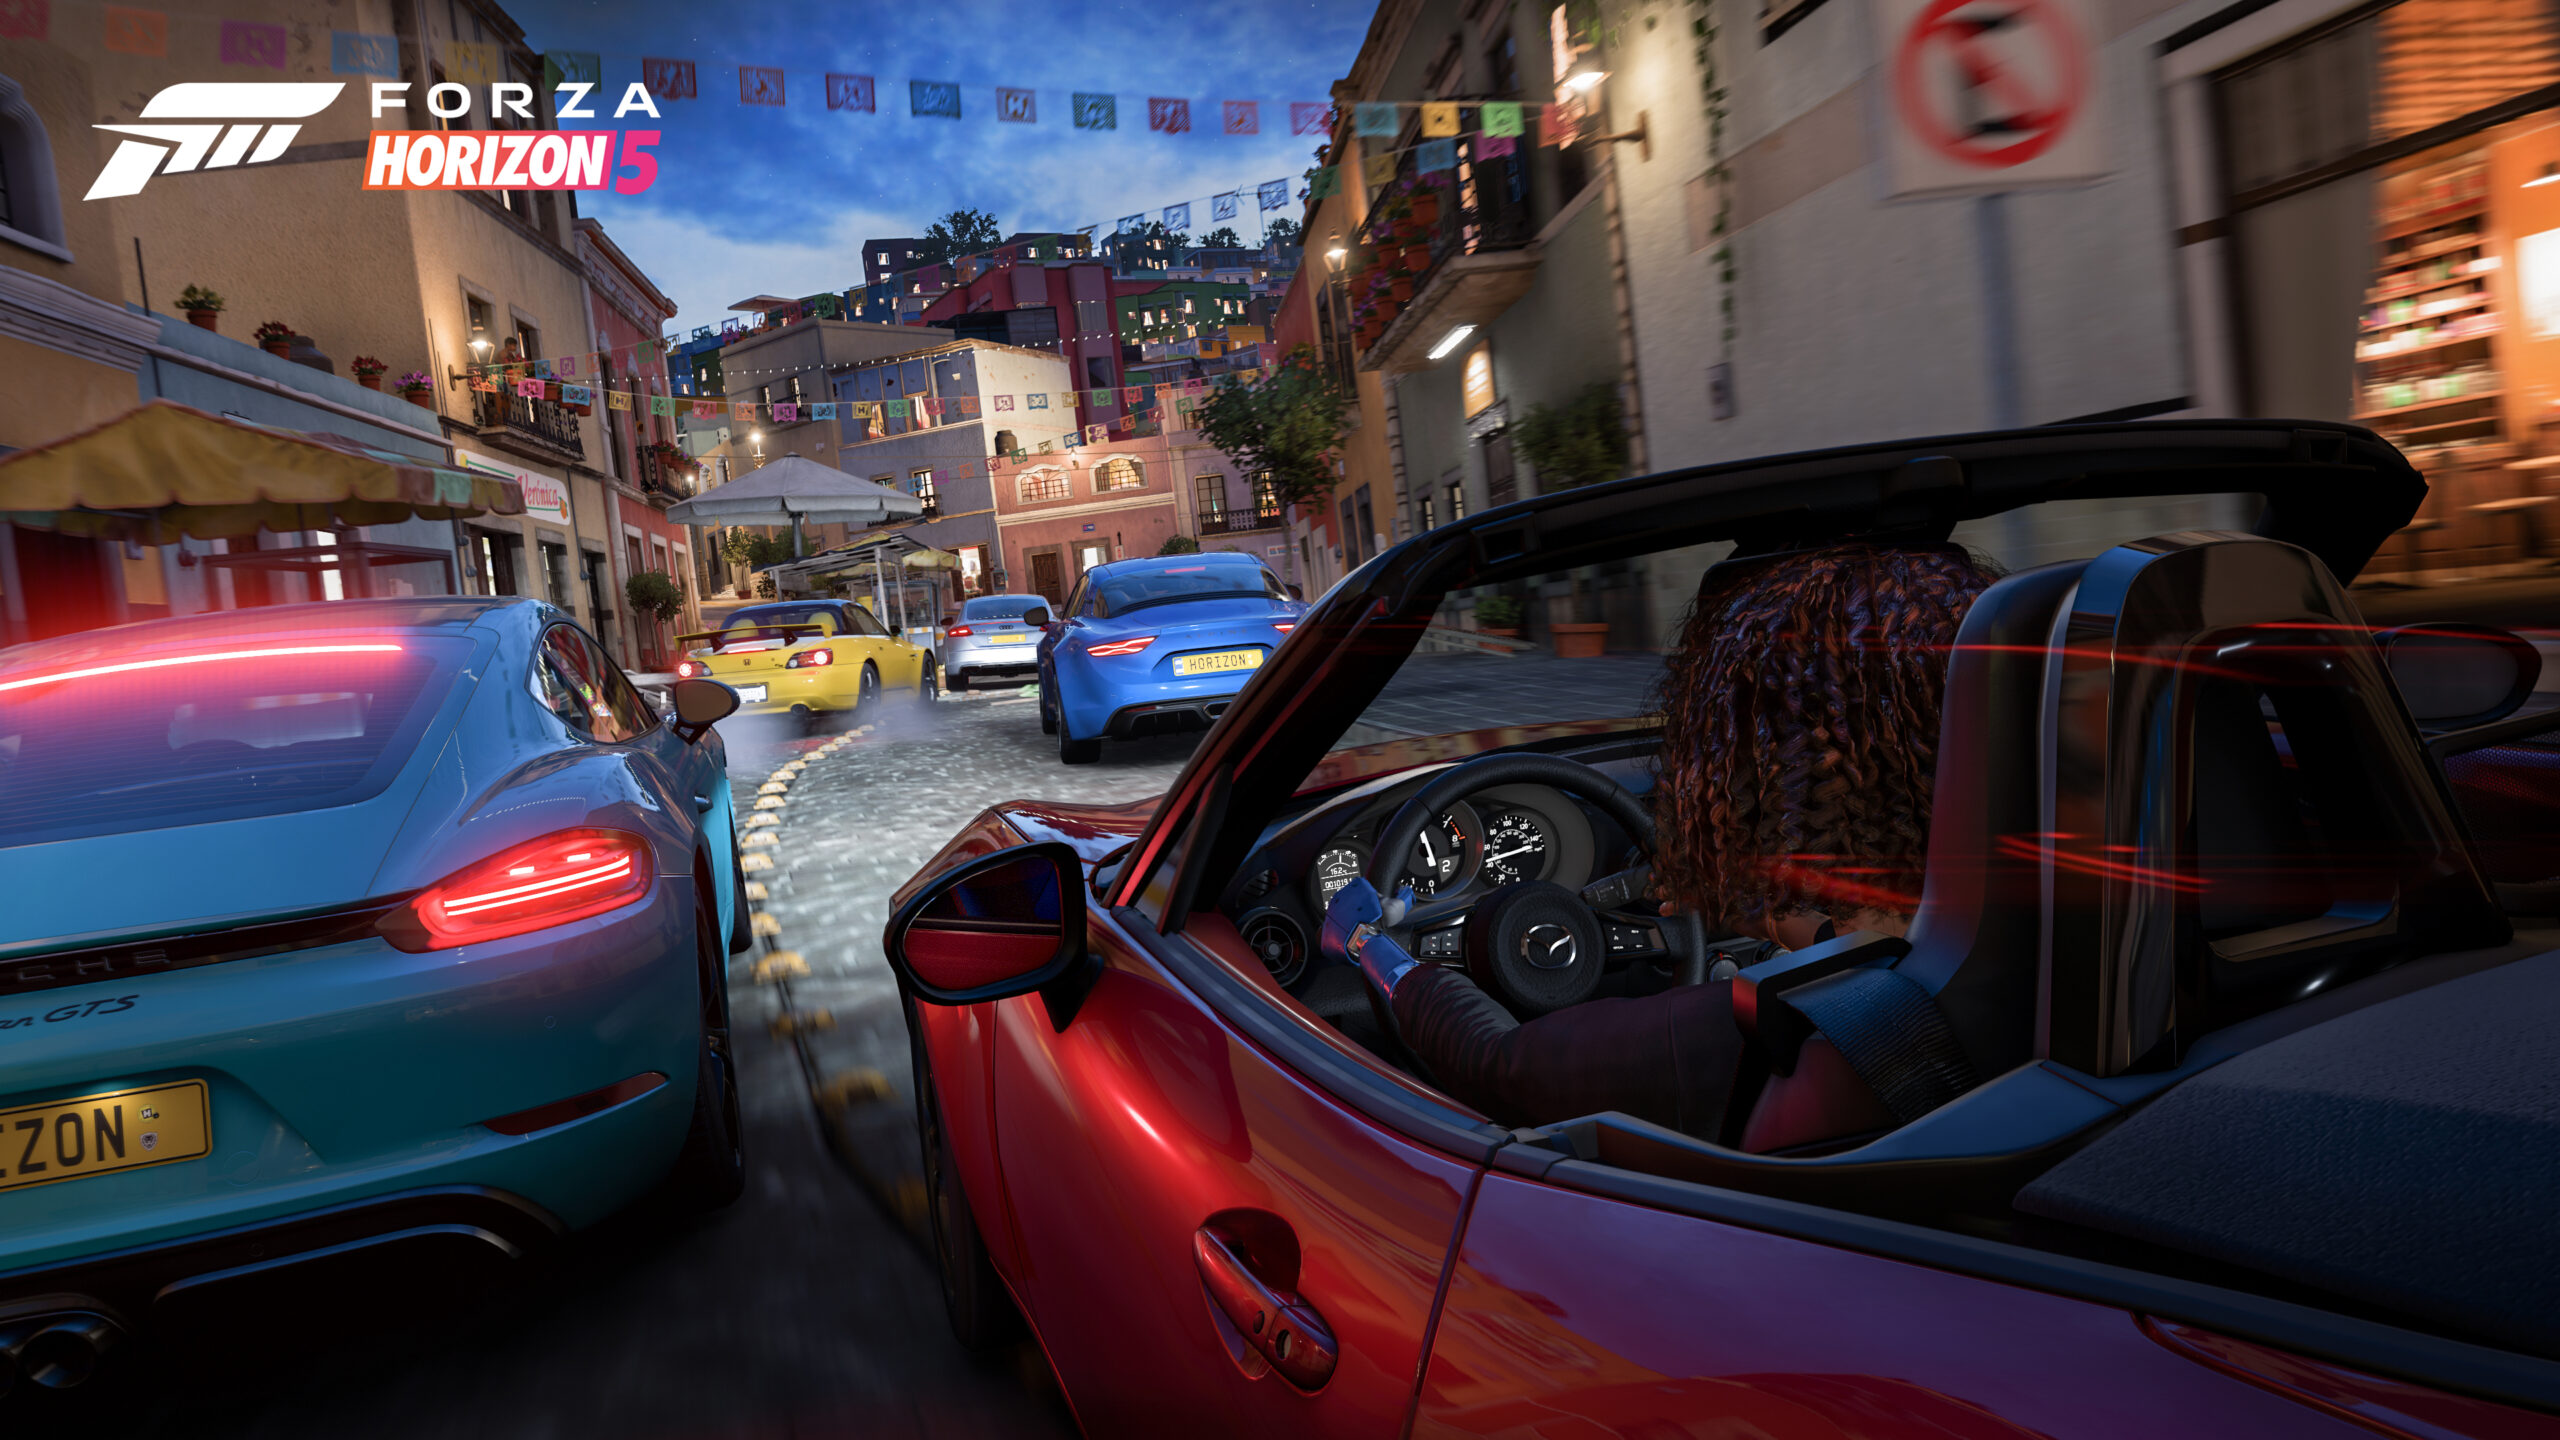 Screenshot from Forza Horizon 5 shows players in a group of colorful cars cruising through a narrow curving street in the city of Guanajuato, Mexico.